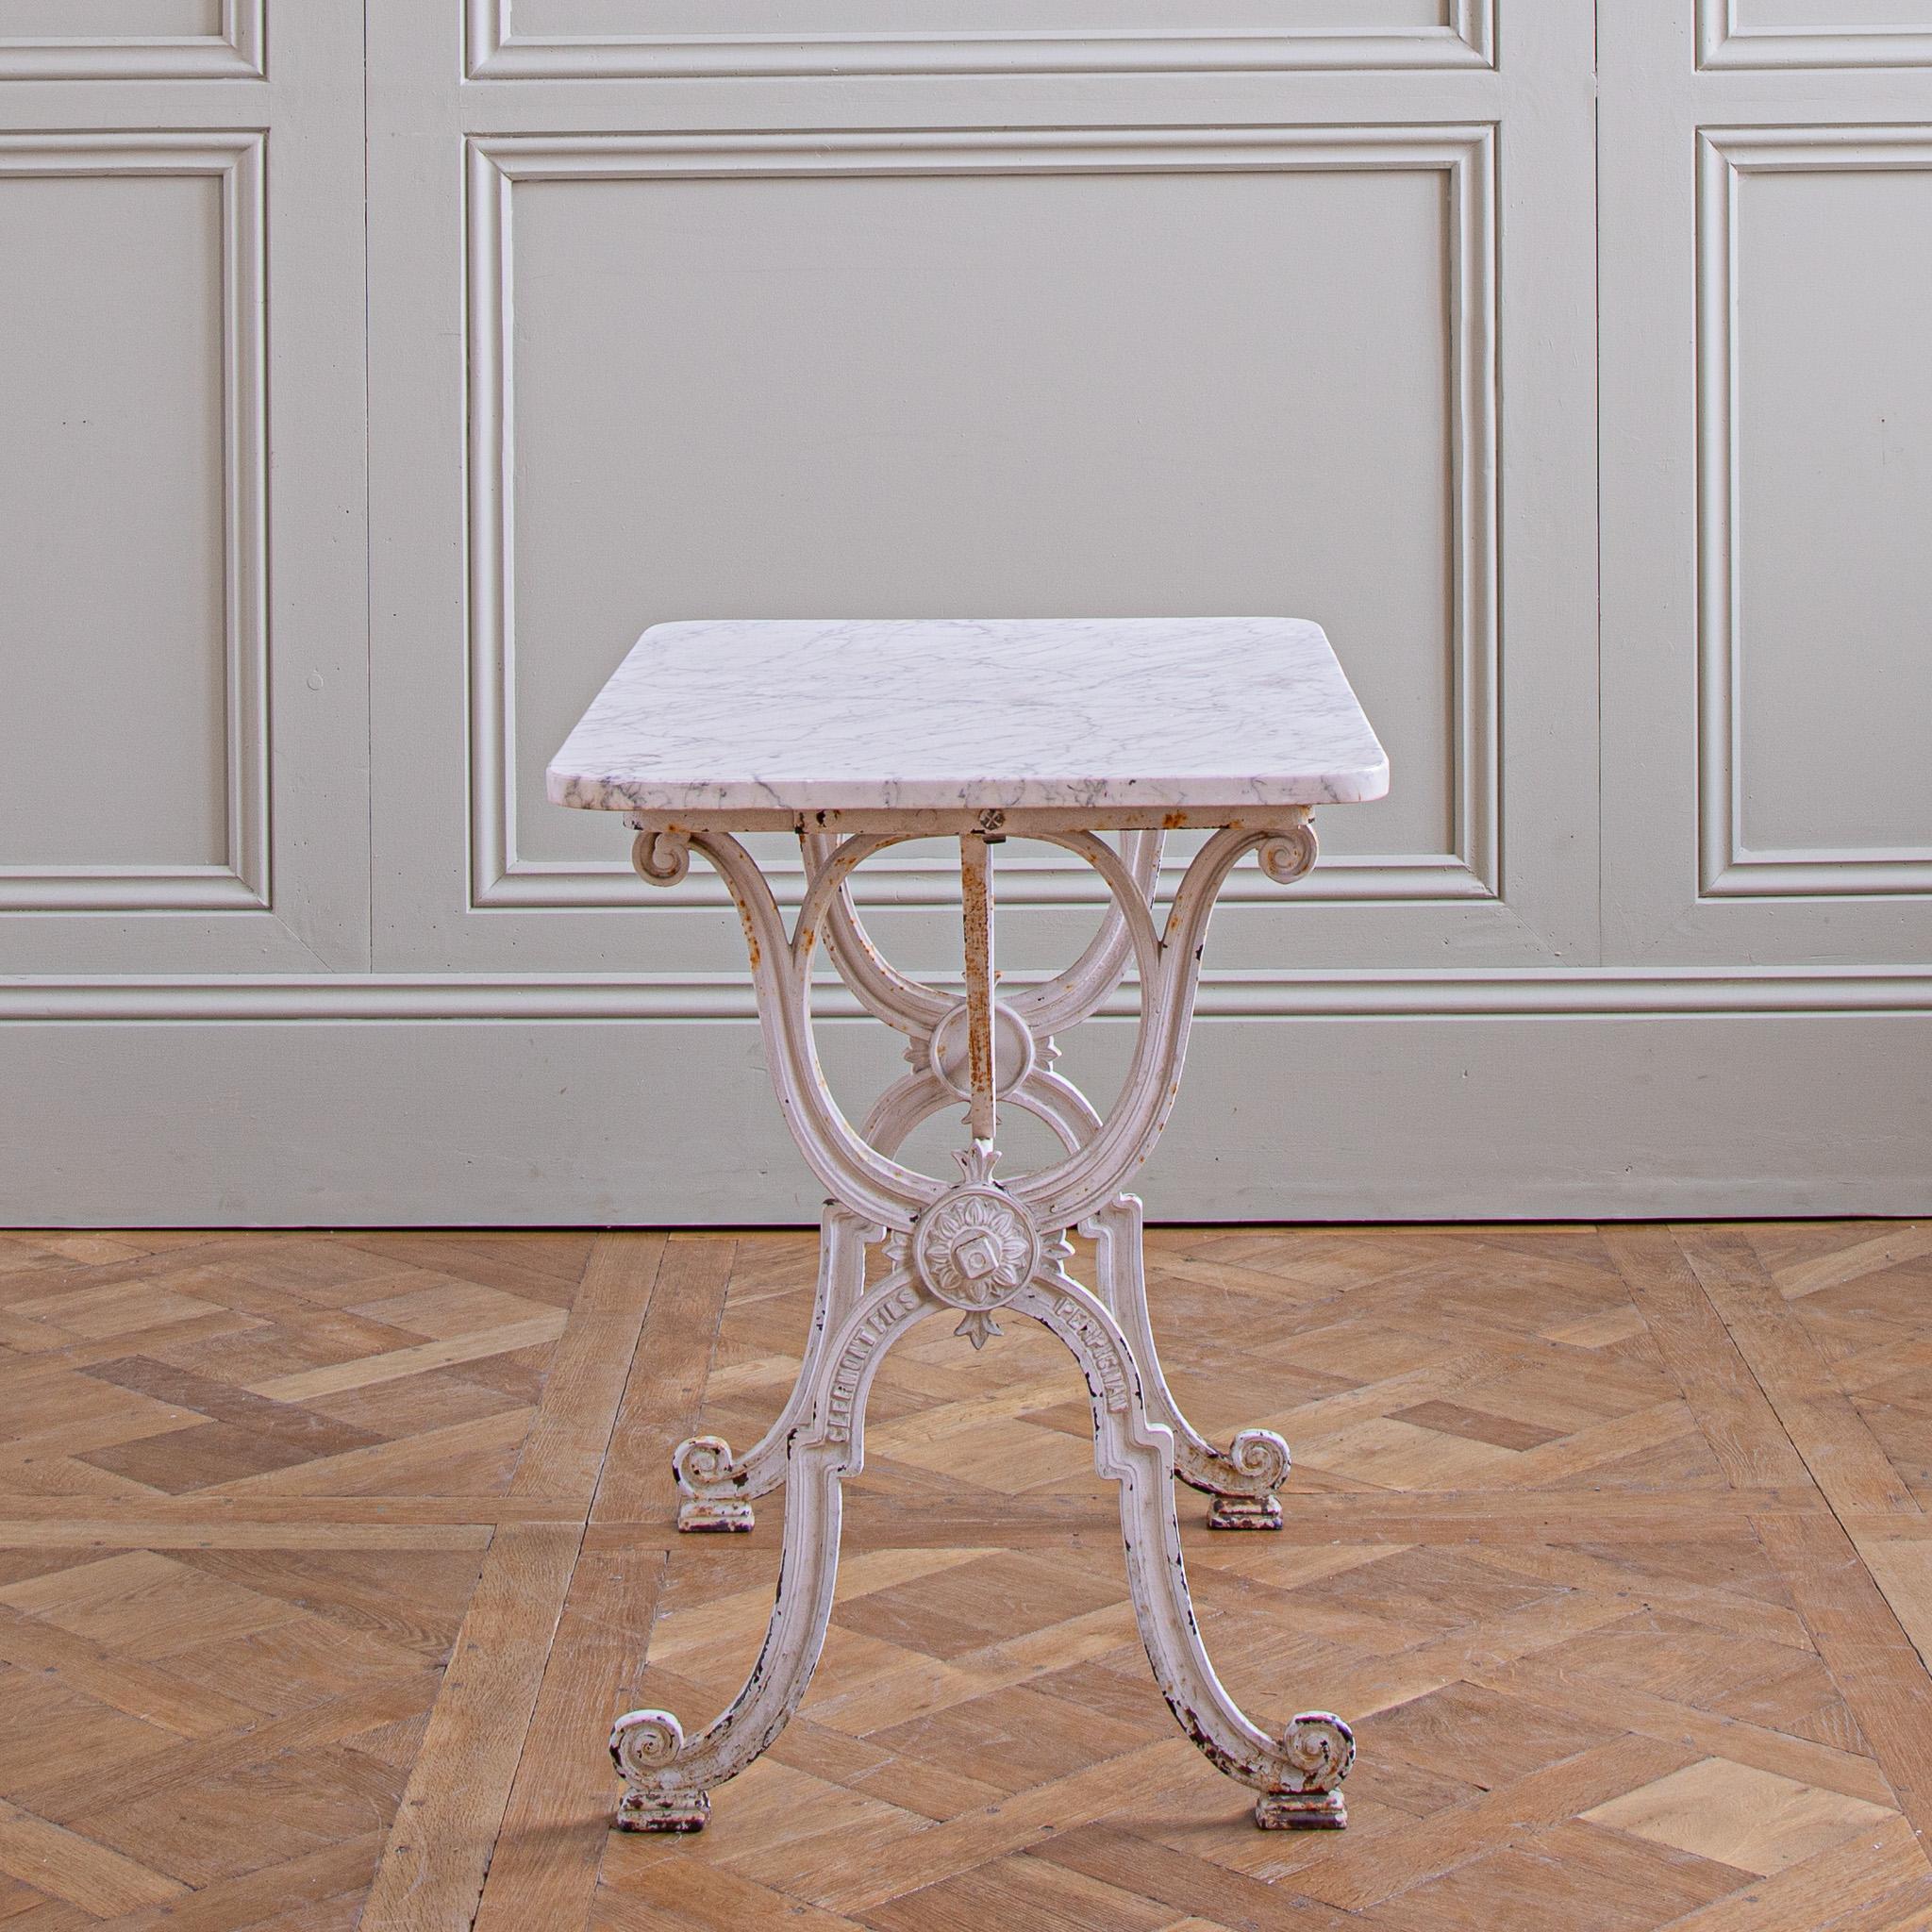 Cast French Antique Iron & Marble Bistro / Garden Table In White By Clermont Fils For Sale